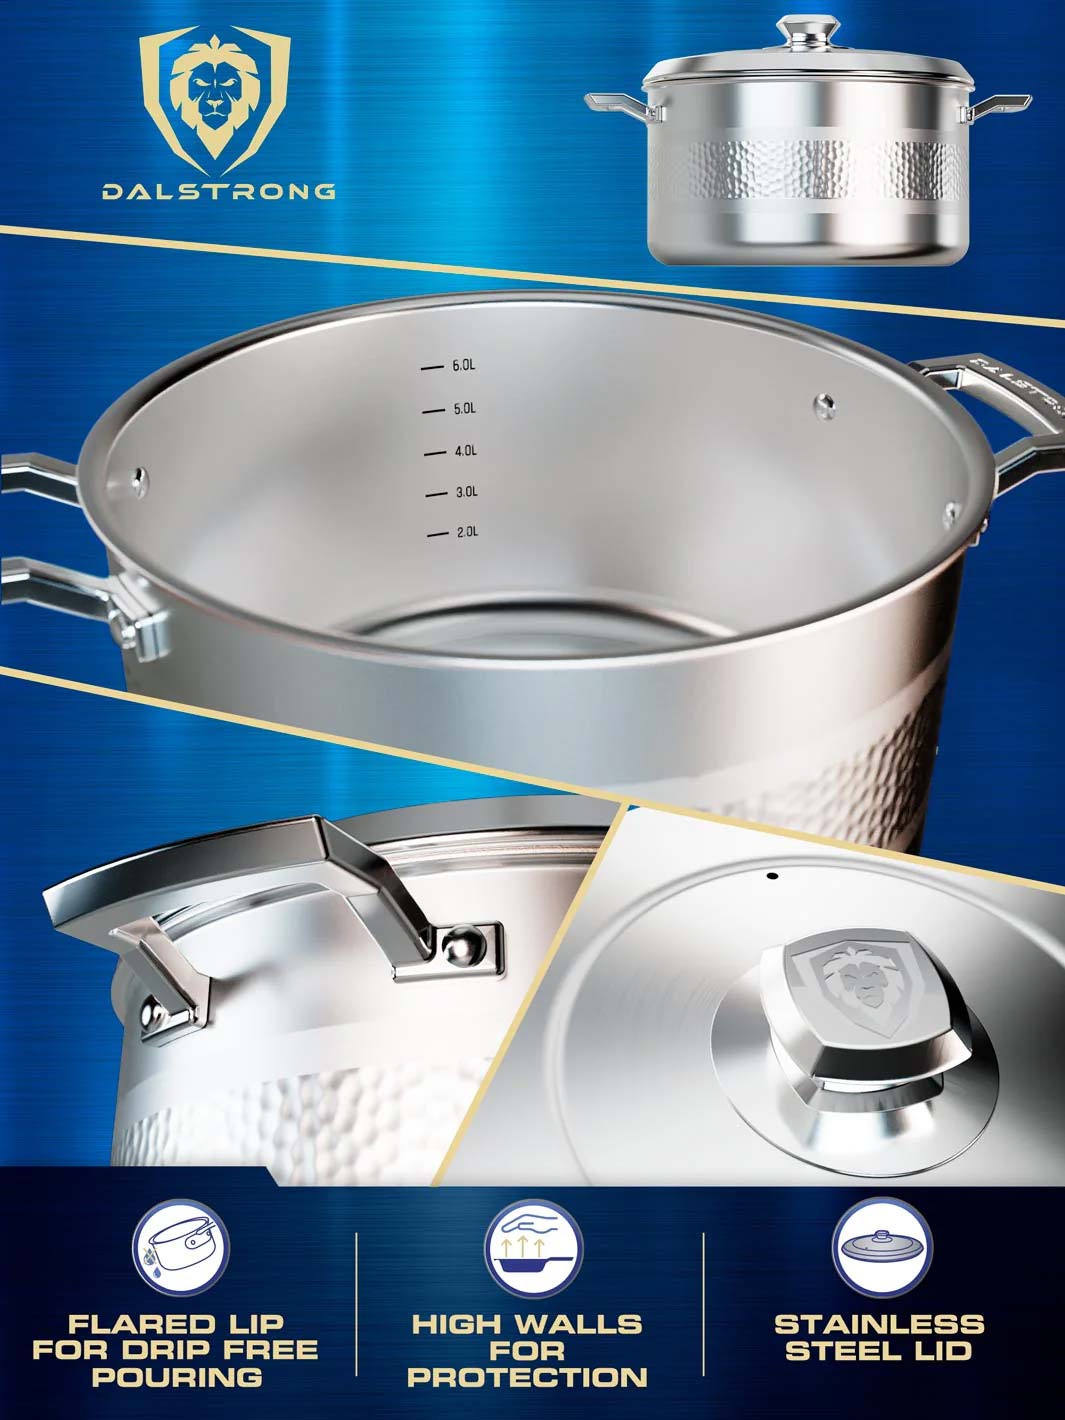 Dalstrong avalon series 8 quart stock pot hammered finish silver showcasing it's high walls and stainless steel lid.